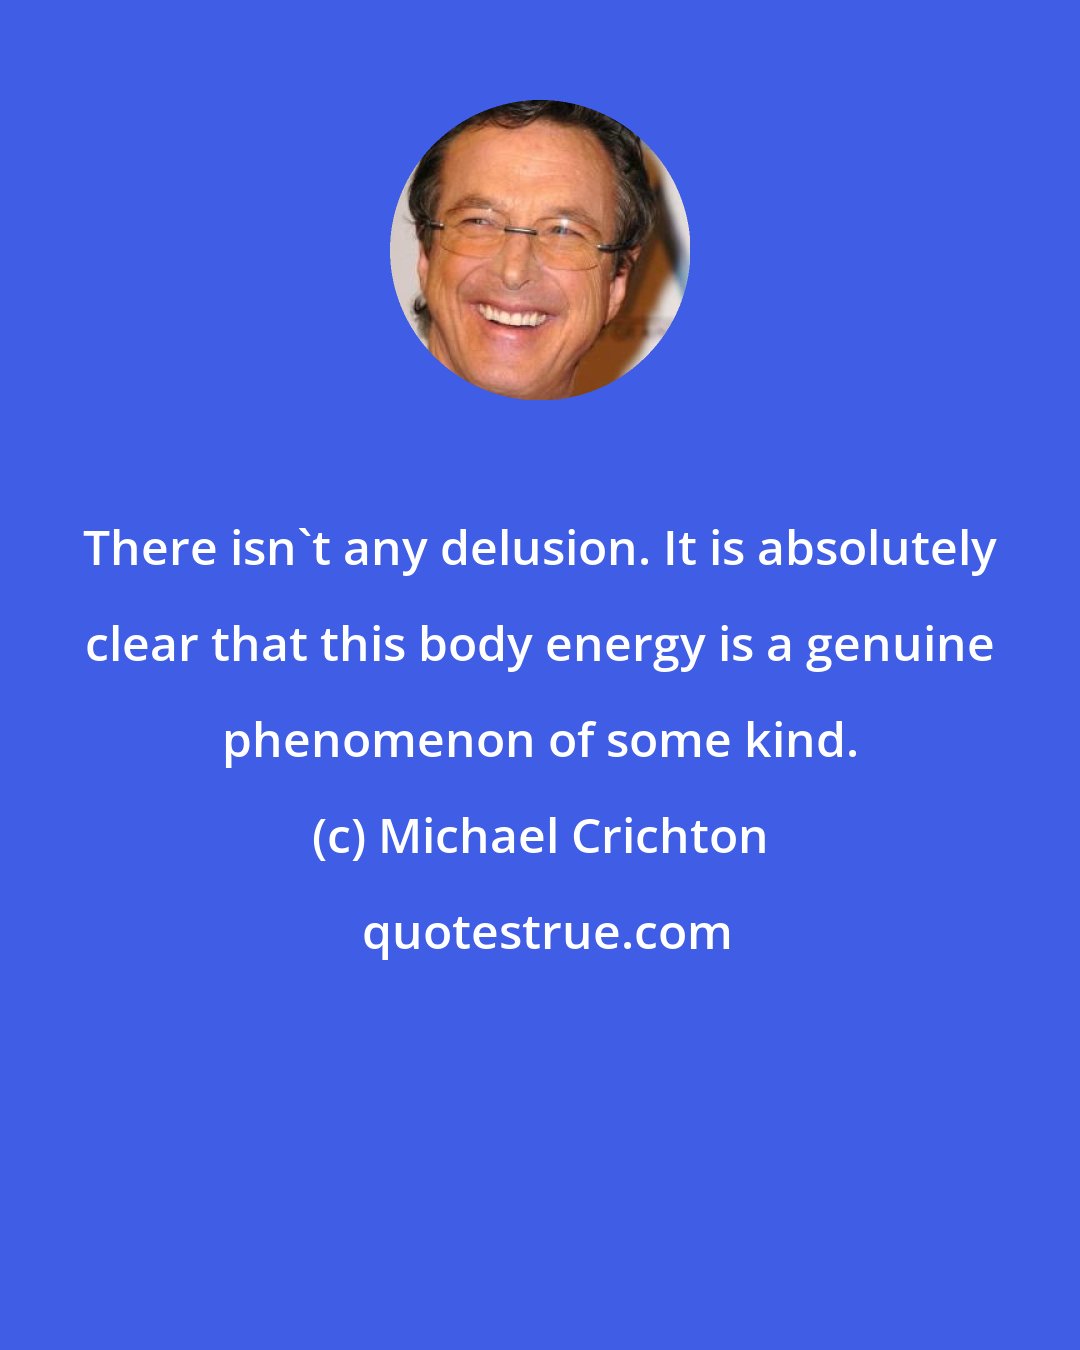 Michael Crichton: There isn't any delusion. It is absolutely clear that this body energy is a genuine phenomenon of some kind.